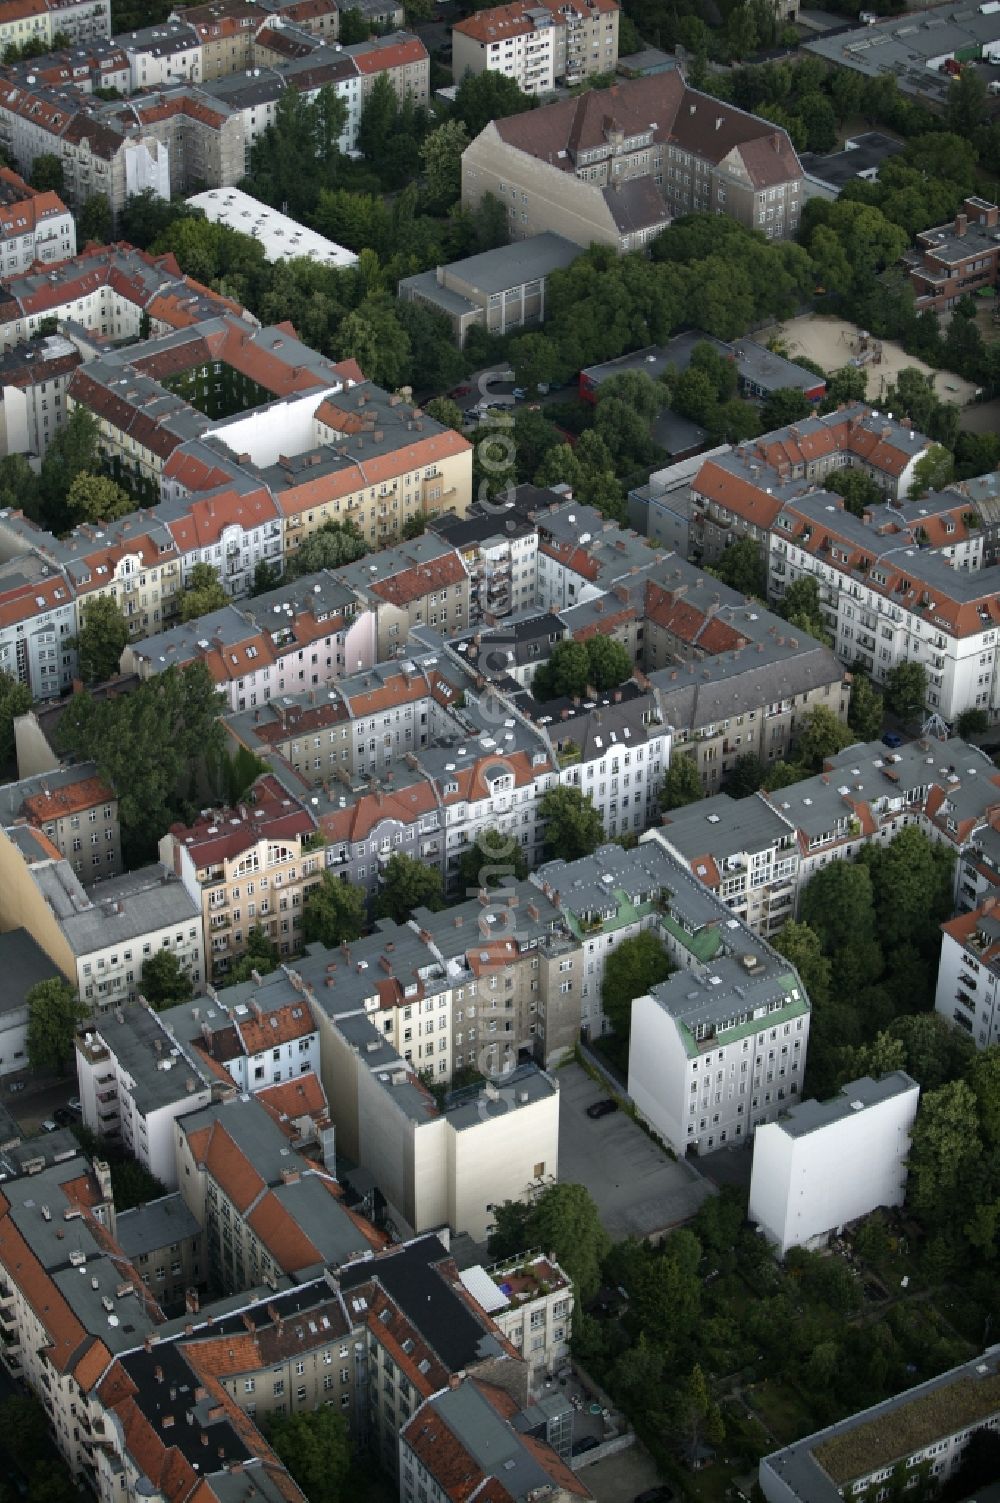 Aerial image Berlin - The residential area between the sun Avenue and the Weser street in the city district Neukoelln in Berlin in the state of Berlin is densely built with multi-family and commercial complexes. The quarters on the Weichsel Road were built late 19th century, primarily for workers with large families. In this deprived area of the capital in recent years, the scool Ruetlischule - the large building where the background - attracted attention. Today it is regarded as an example of successful integration in multi-ethnic residential area